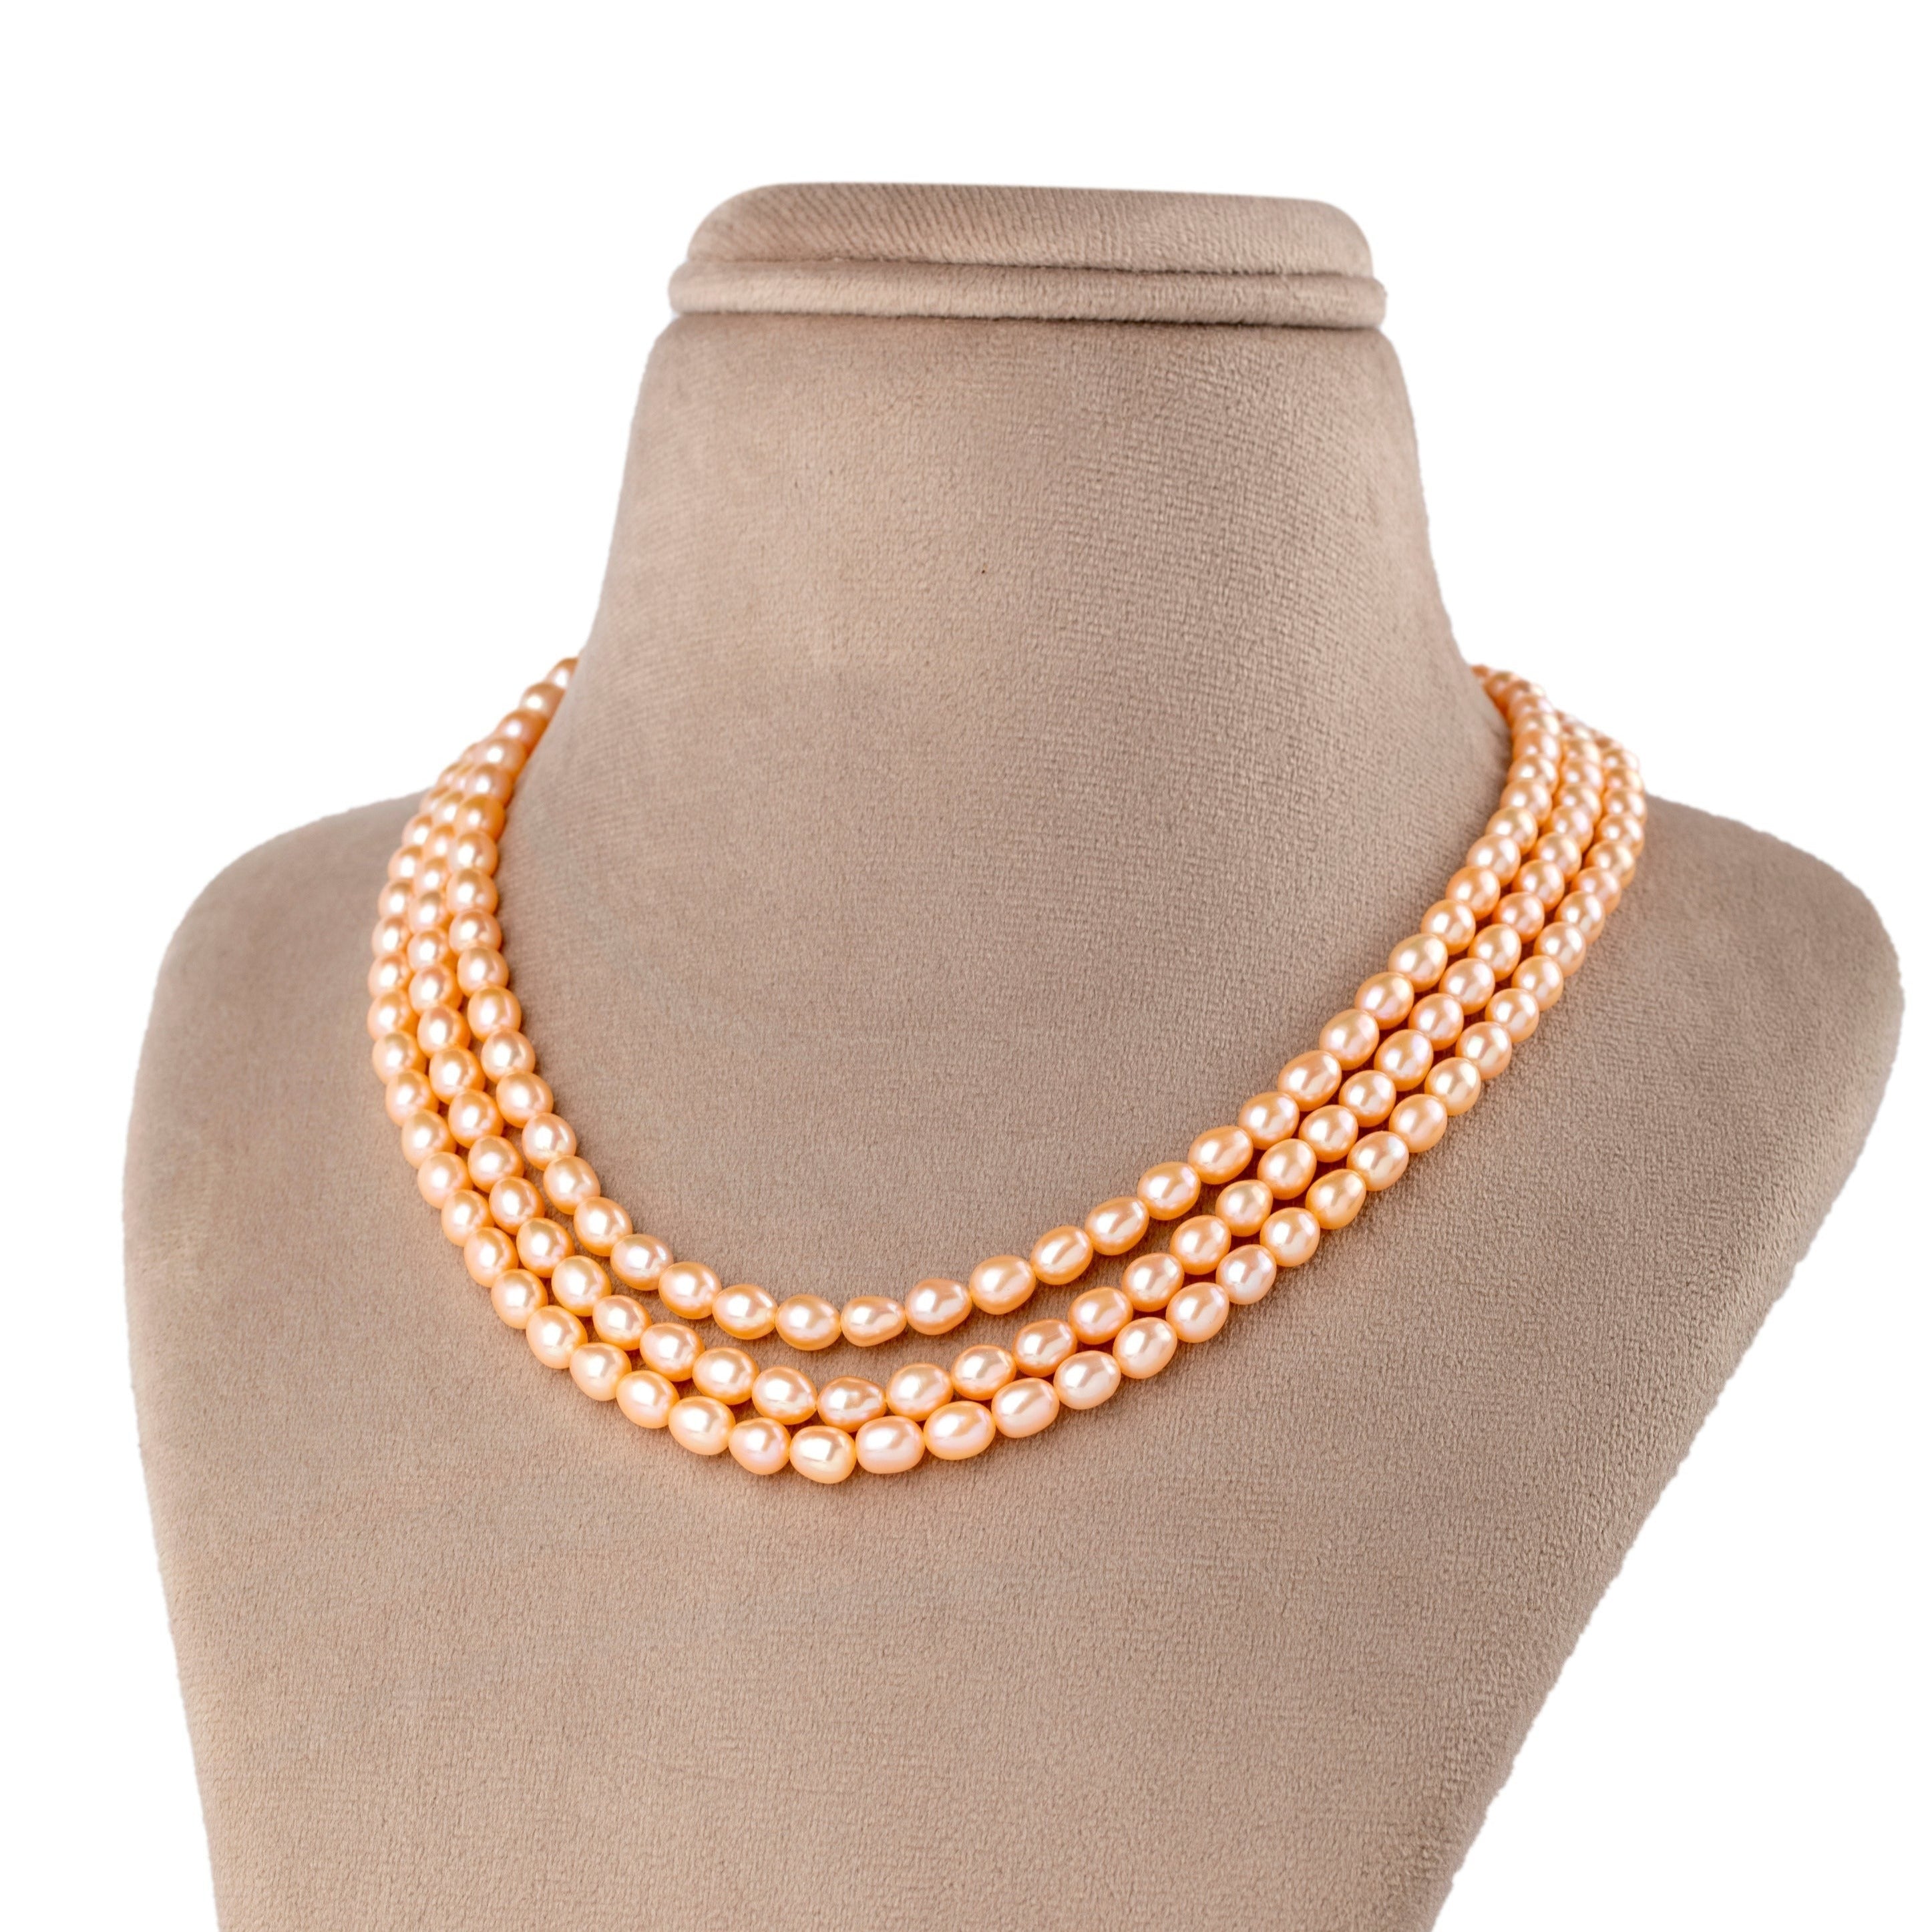 Peachy Trio Freshwater Pearl Necklace